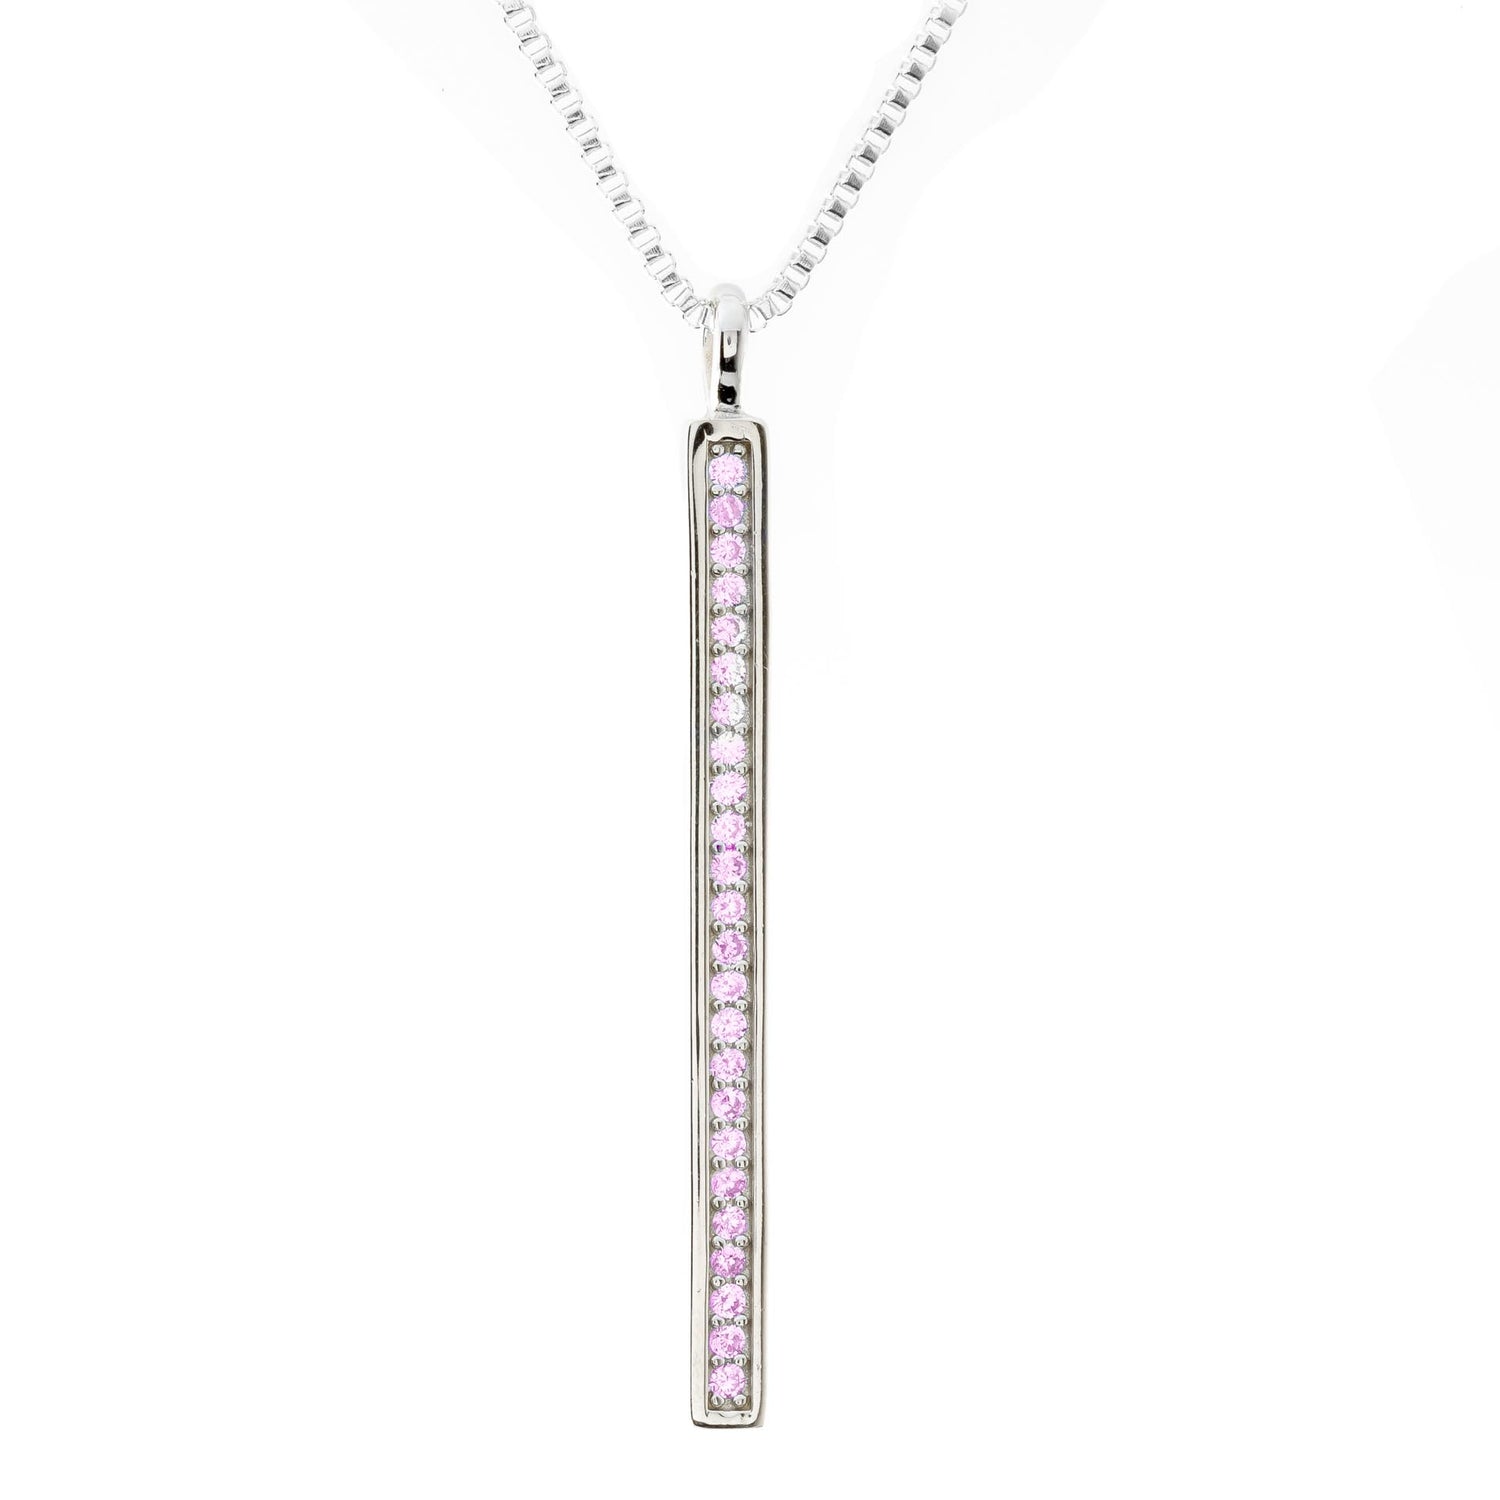 Solid Bar Pink Rhinestone Sterling Silver Pendant With Triple Rhodium Coating (2 1/2 inch Long) Default Title